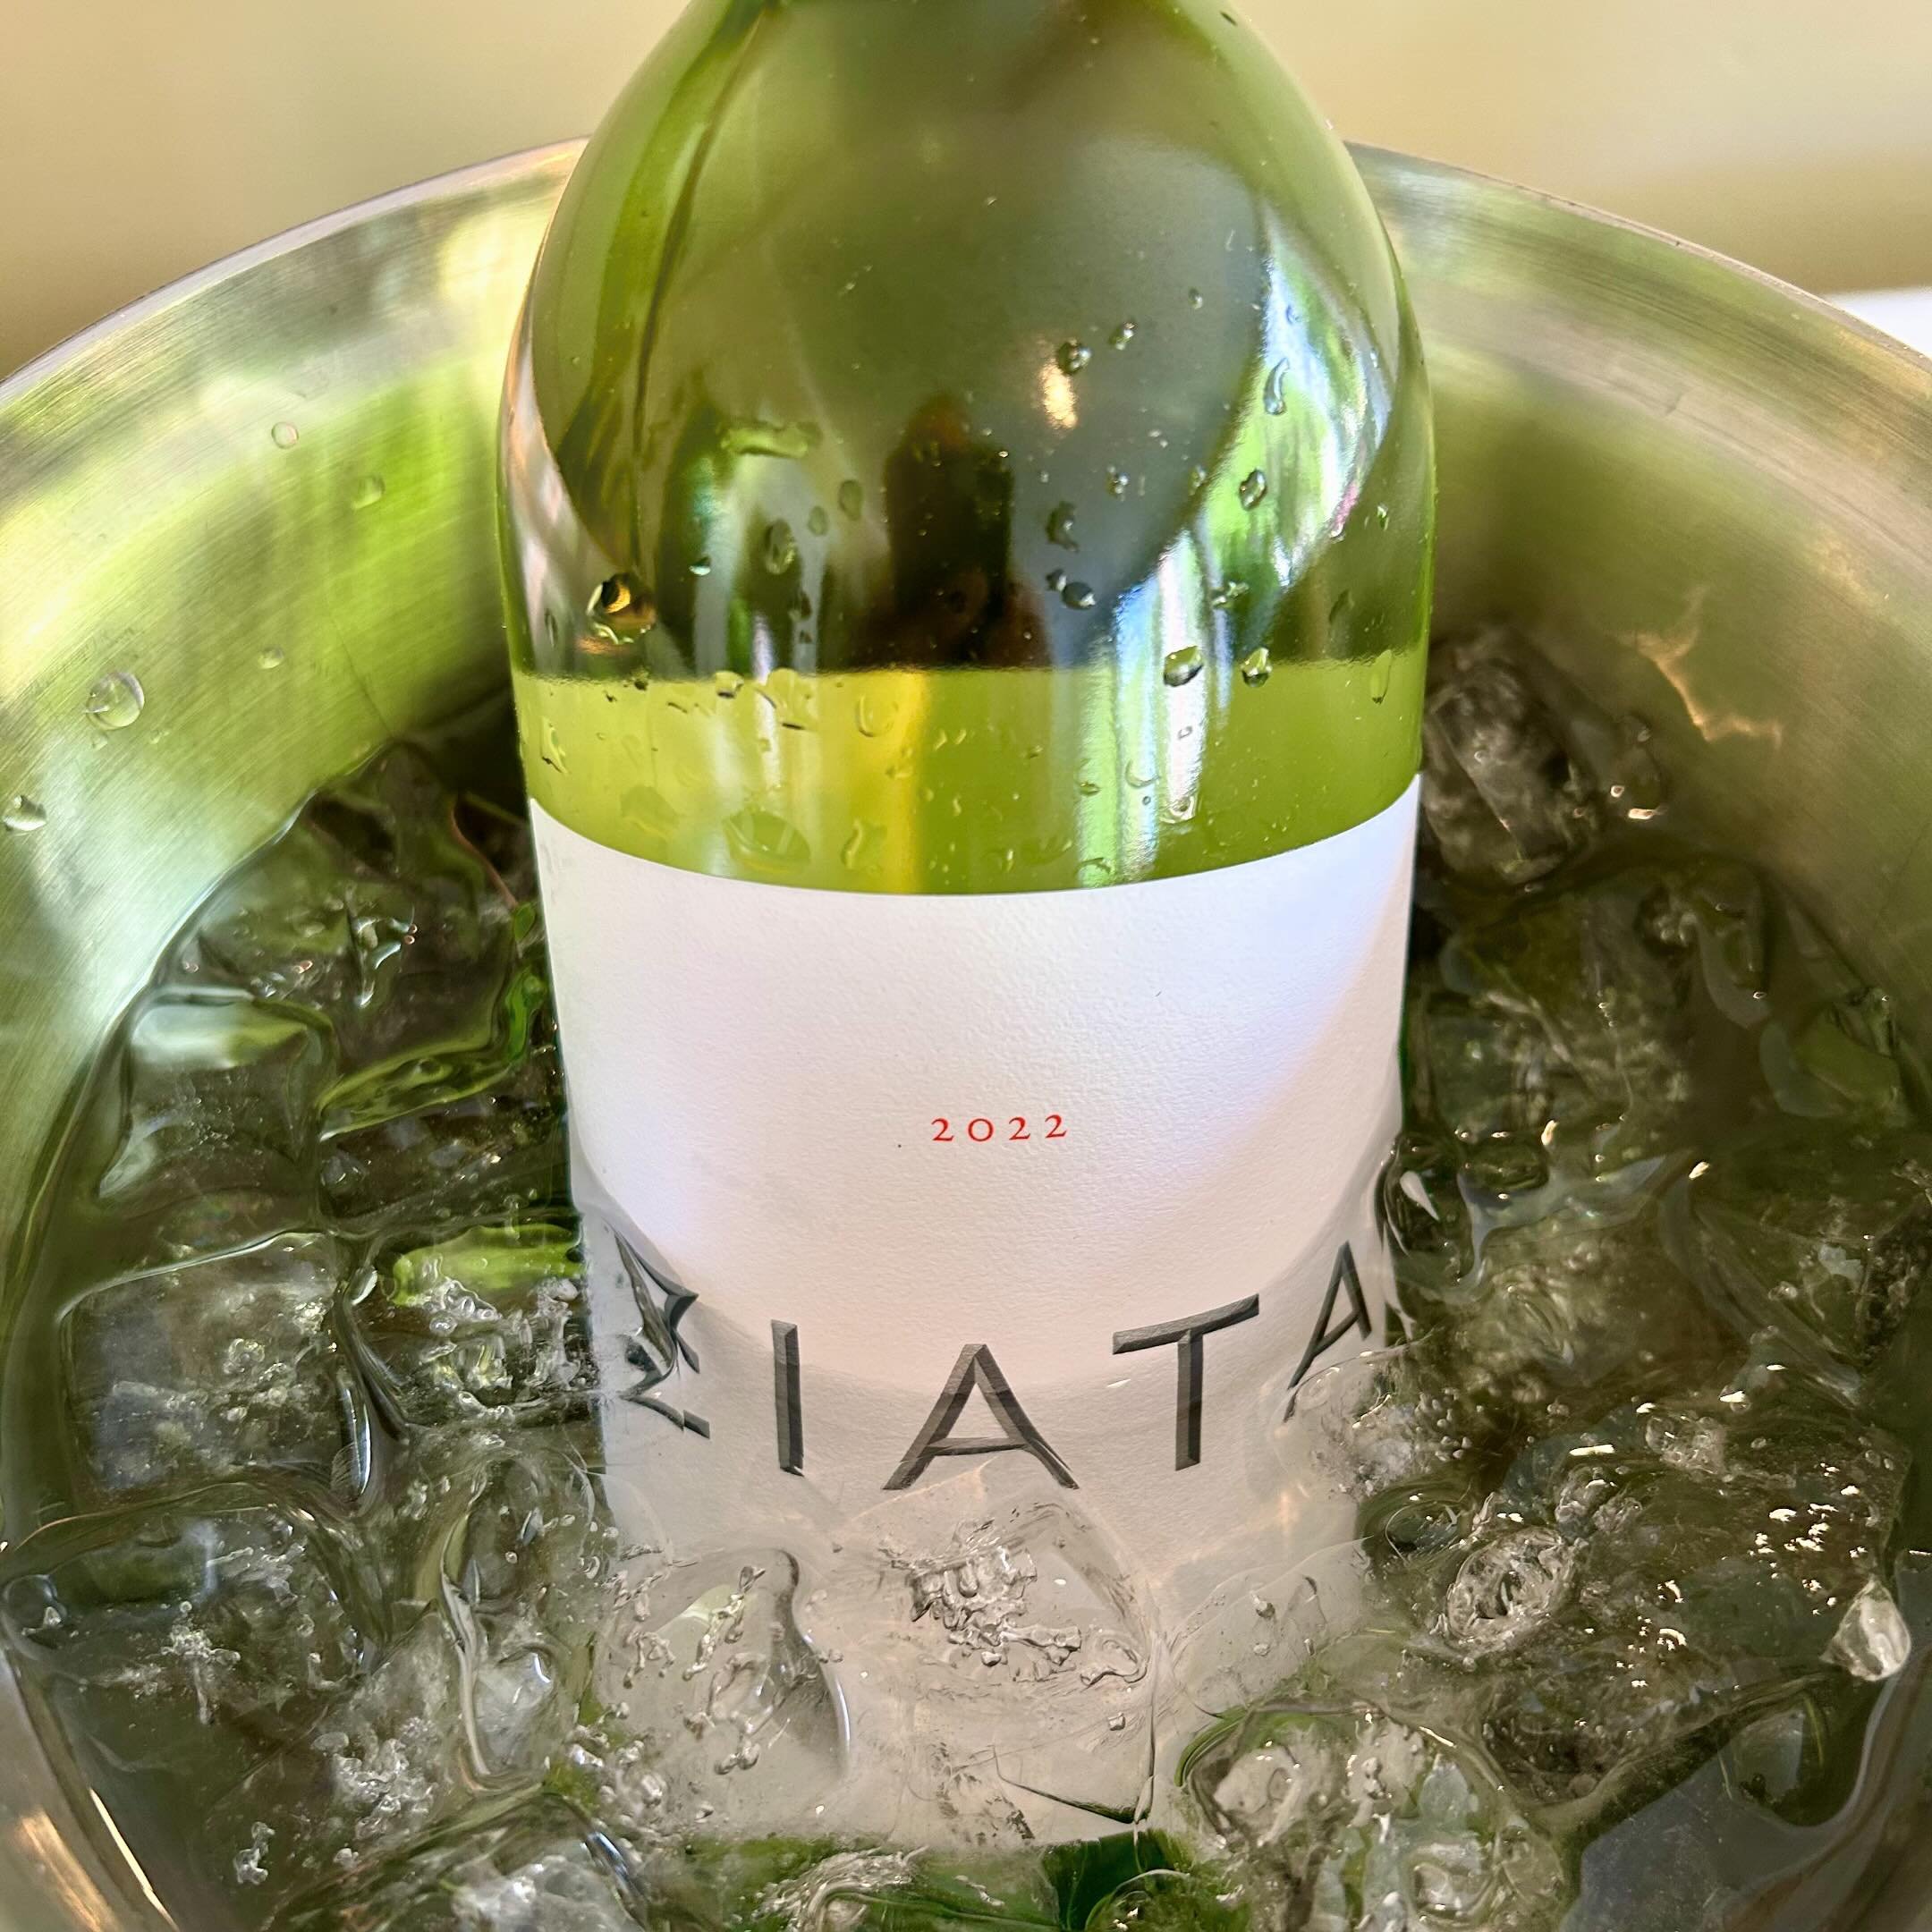 Wine Wednesday!  2022 Ziata Sauvignon Blanc - you&rsquo;ll fall in love after that first sip! @ziata_napavalley #winewednesday #sauvignonblanc #napavalley #napavalleywine #bedandbreakfast #winecountry #wineporn #lovethewineyourewith #visitcalistoga #